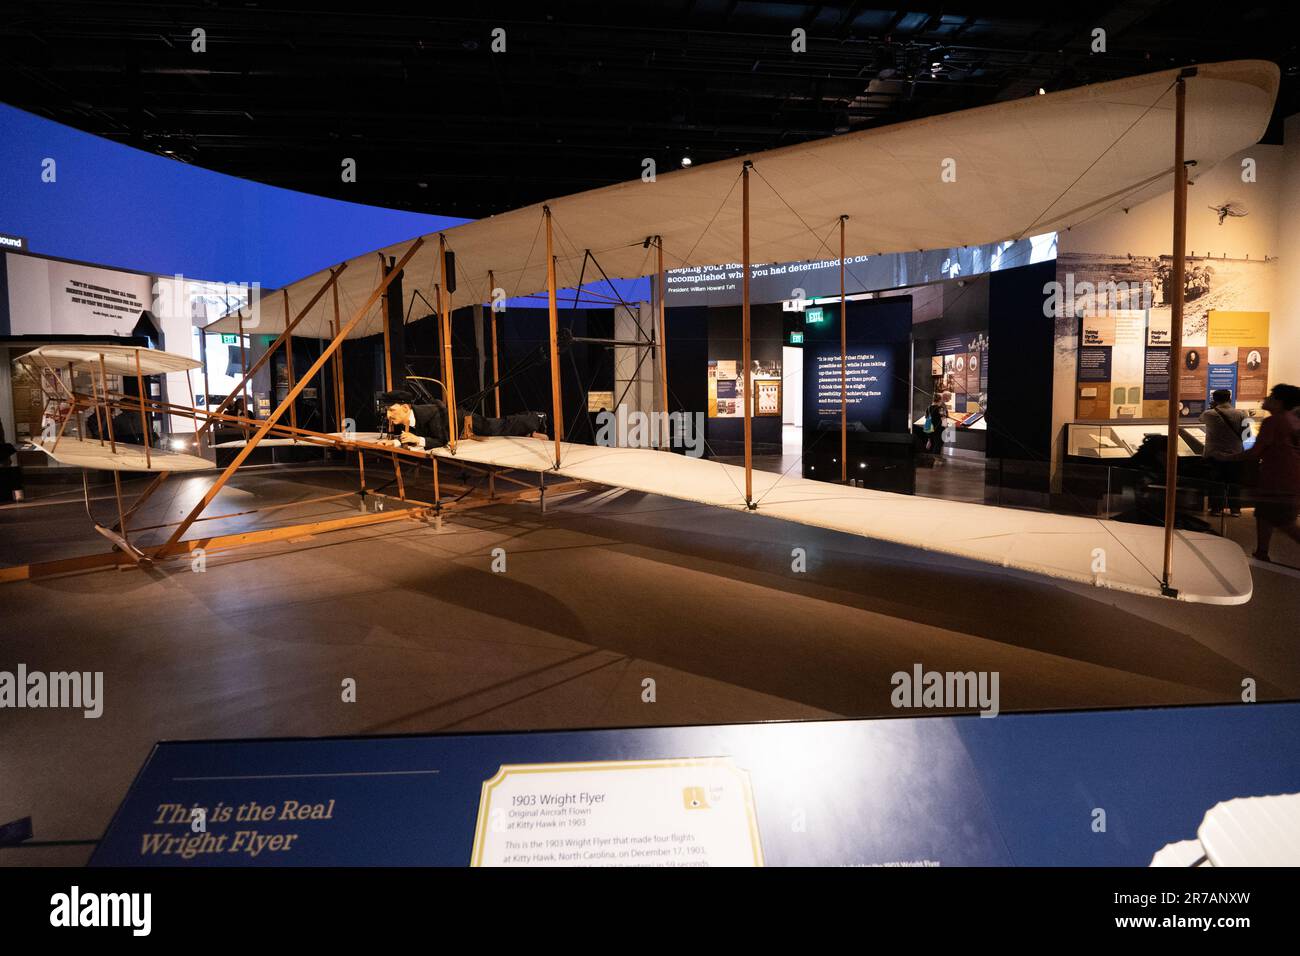 The Wright Flyer (Kitty Hawk, Flyer 1, Flyer 1903) nel National Air and Space Museum di Washington, D.C.Picture: Garyroberts/worldwidefeatures.com Foto Stock